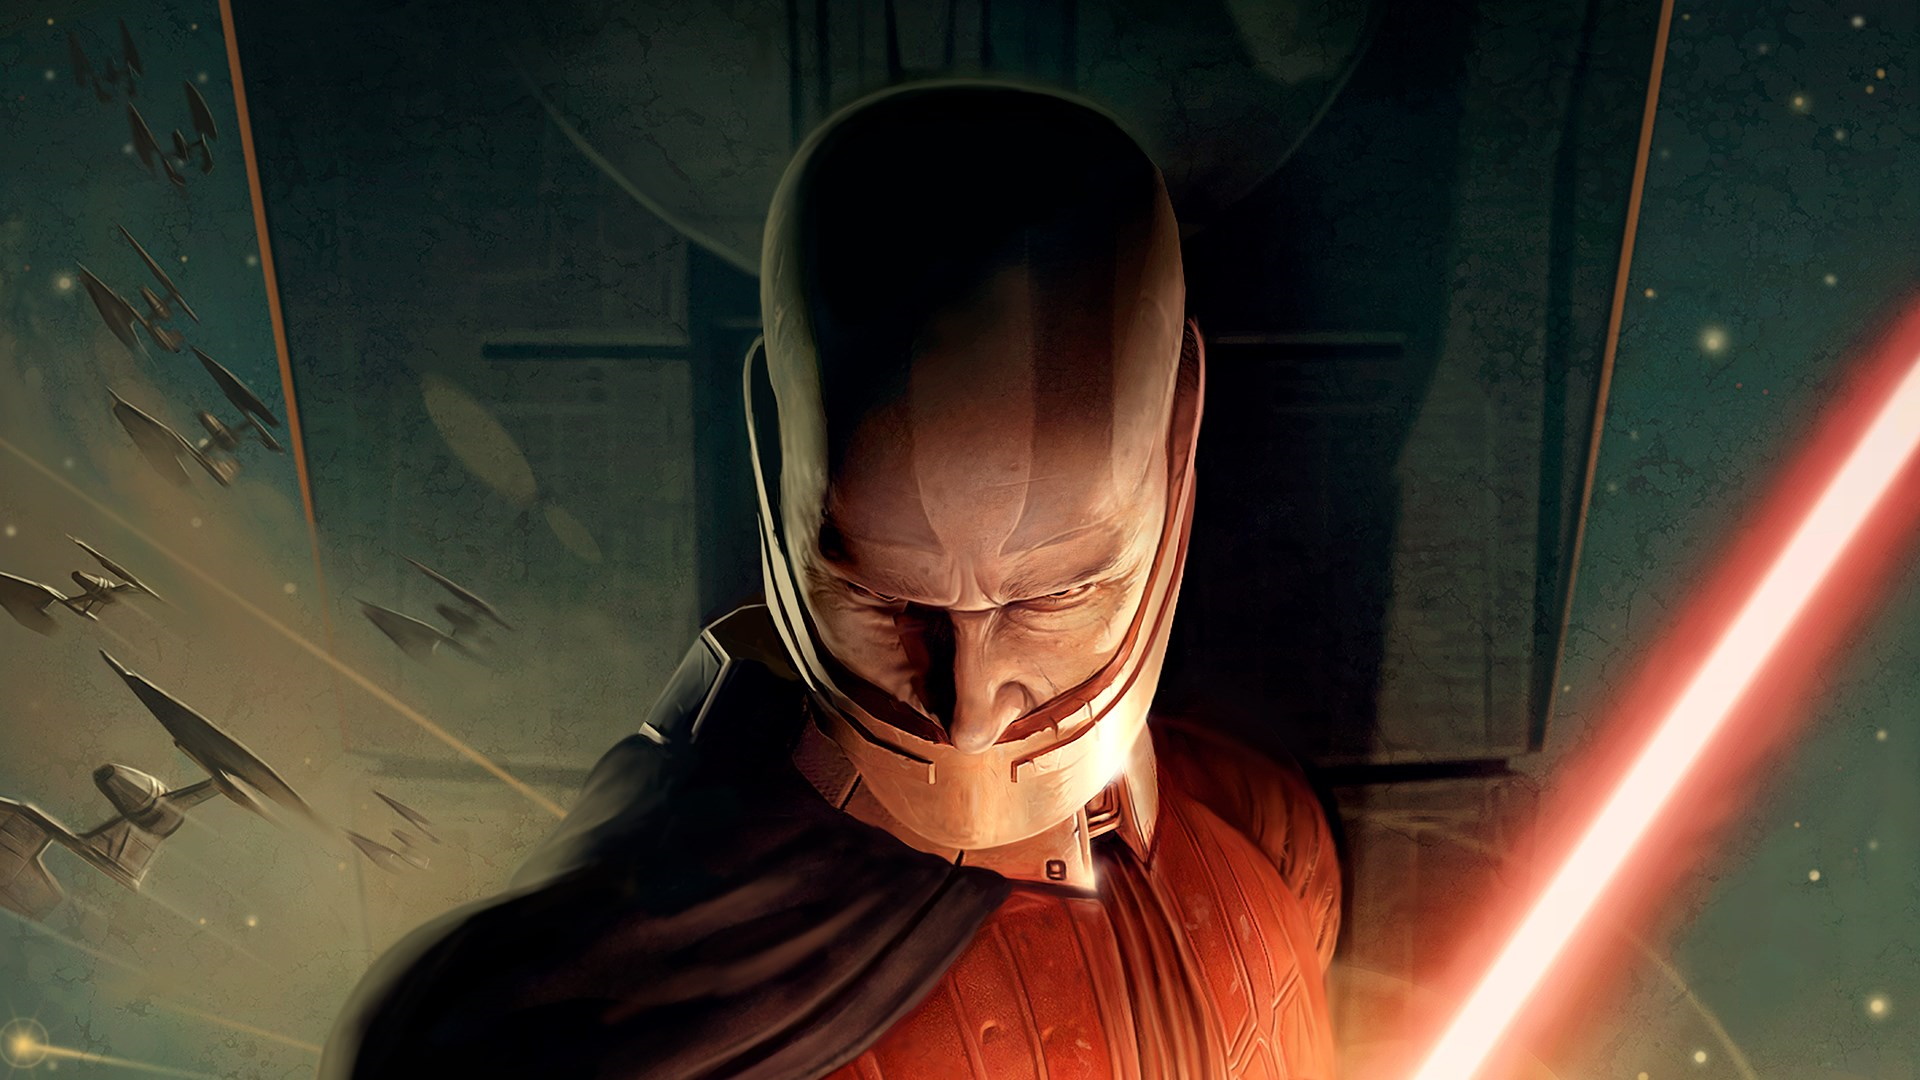 Report: The Star Wars KOTOR remake is delayed indefinitely